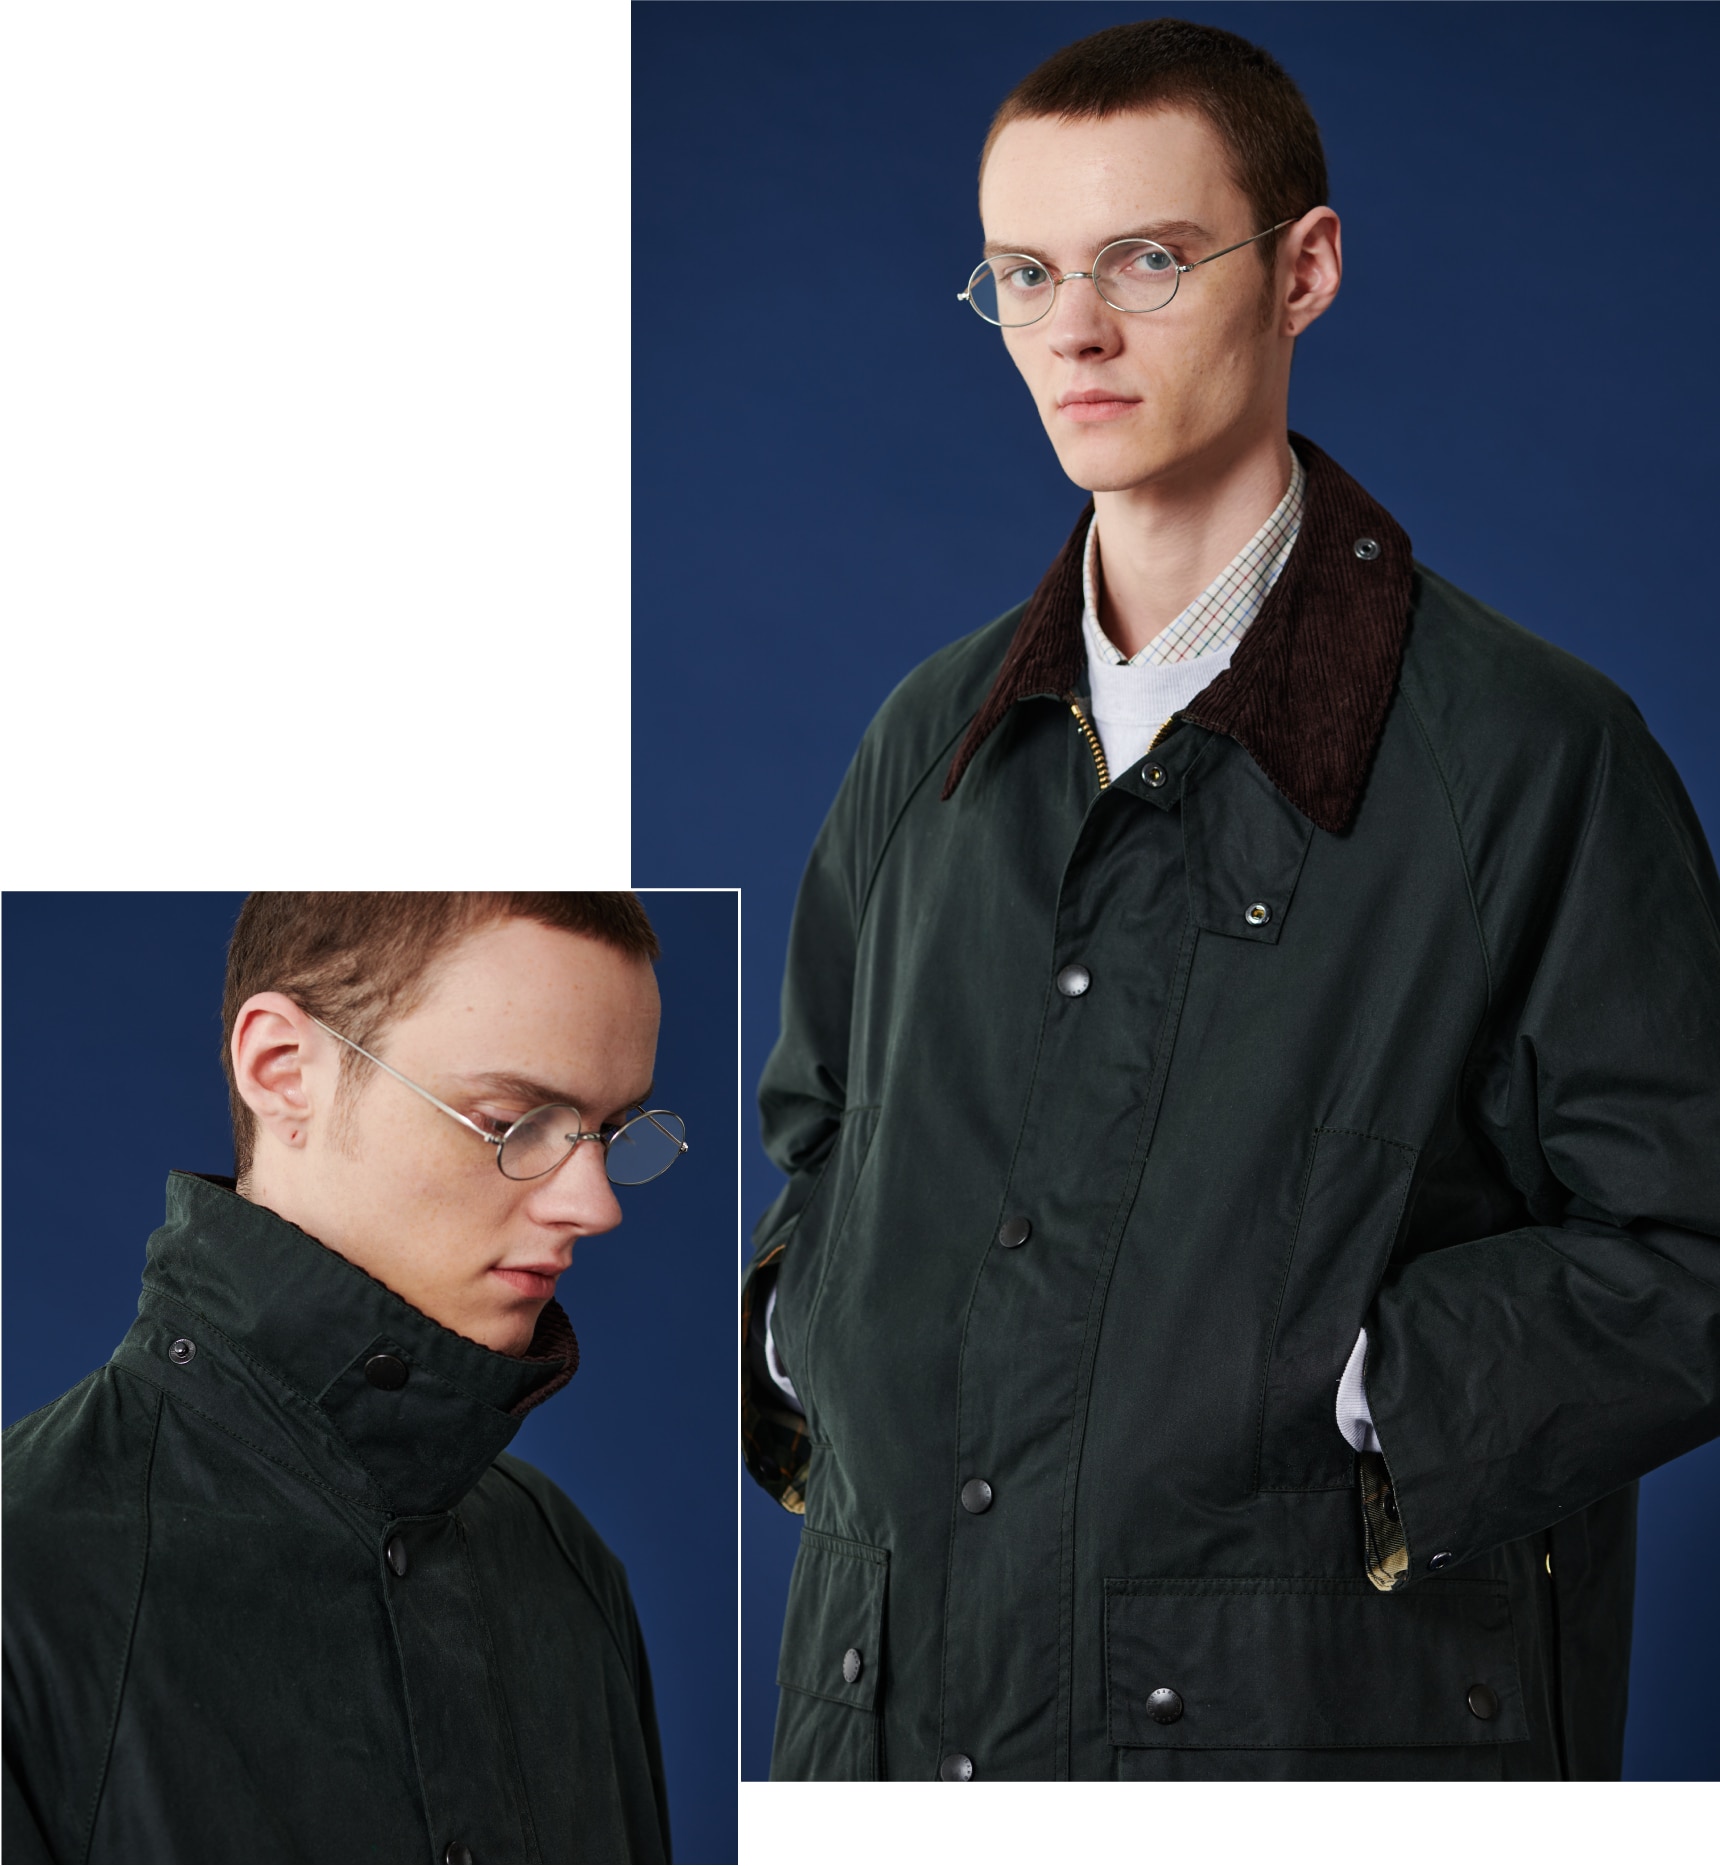 Barbour - 23AW EXCLUSIVE MODEL